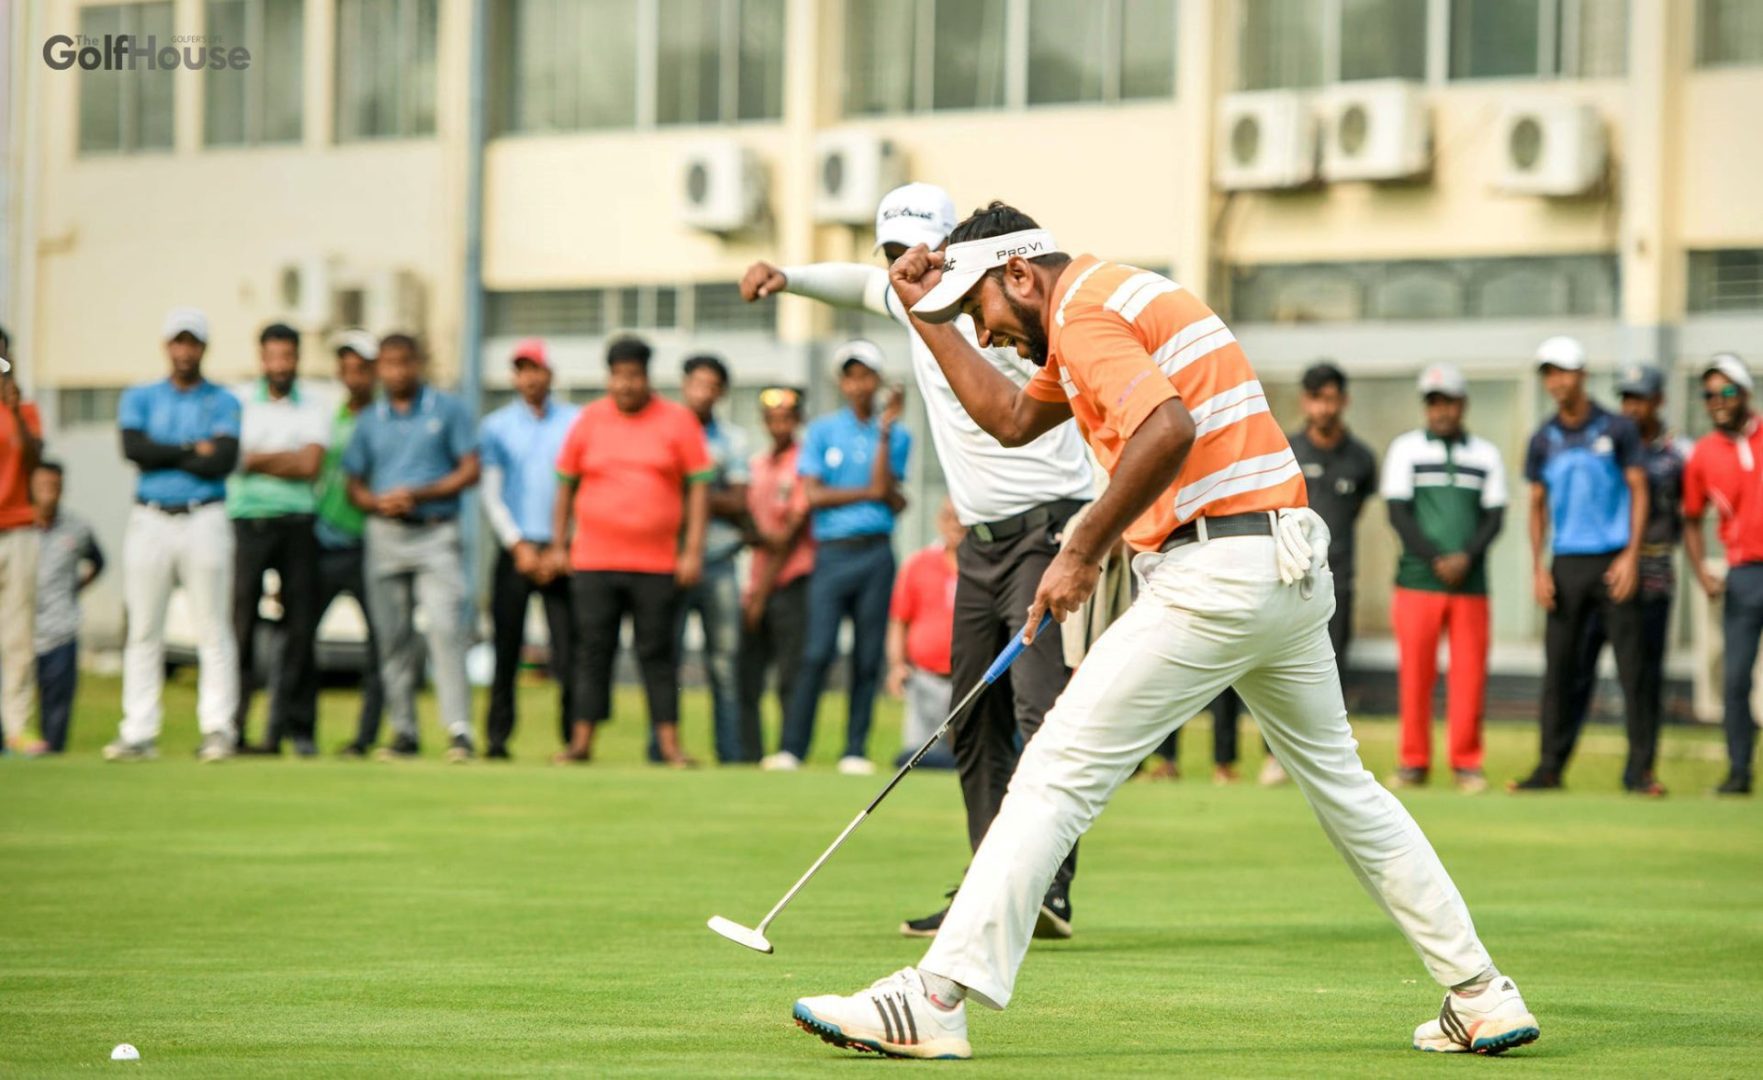 Www R Ma Xxxx Mp3 - JAMAL EXCITED TO REPRESENT BANGLADESH IN ASIAN GAMES - TheGolfHouse